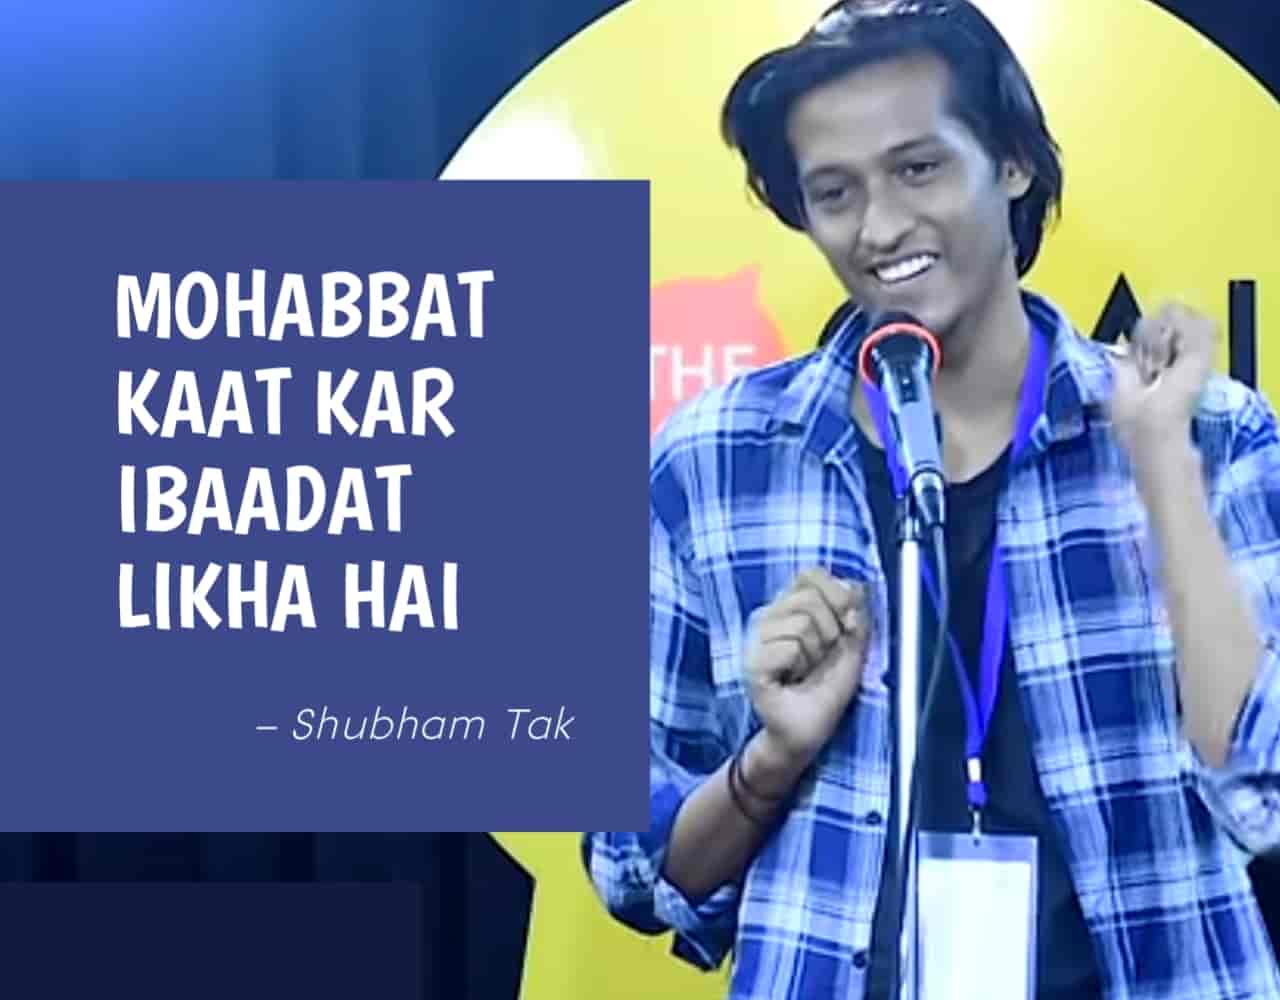 The beautiful Poetry  'Mohabbat Kaat Kar Ibaadat Likha Hai' for The Social House is presented by Shubham Tak and also written by him